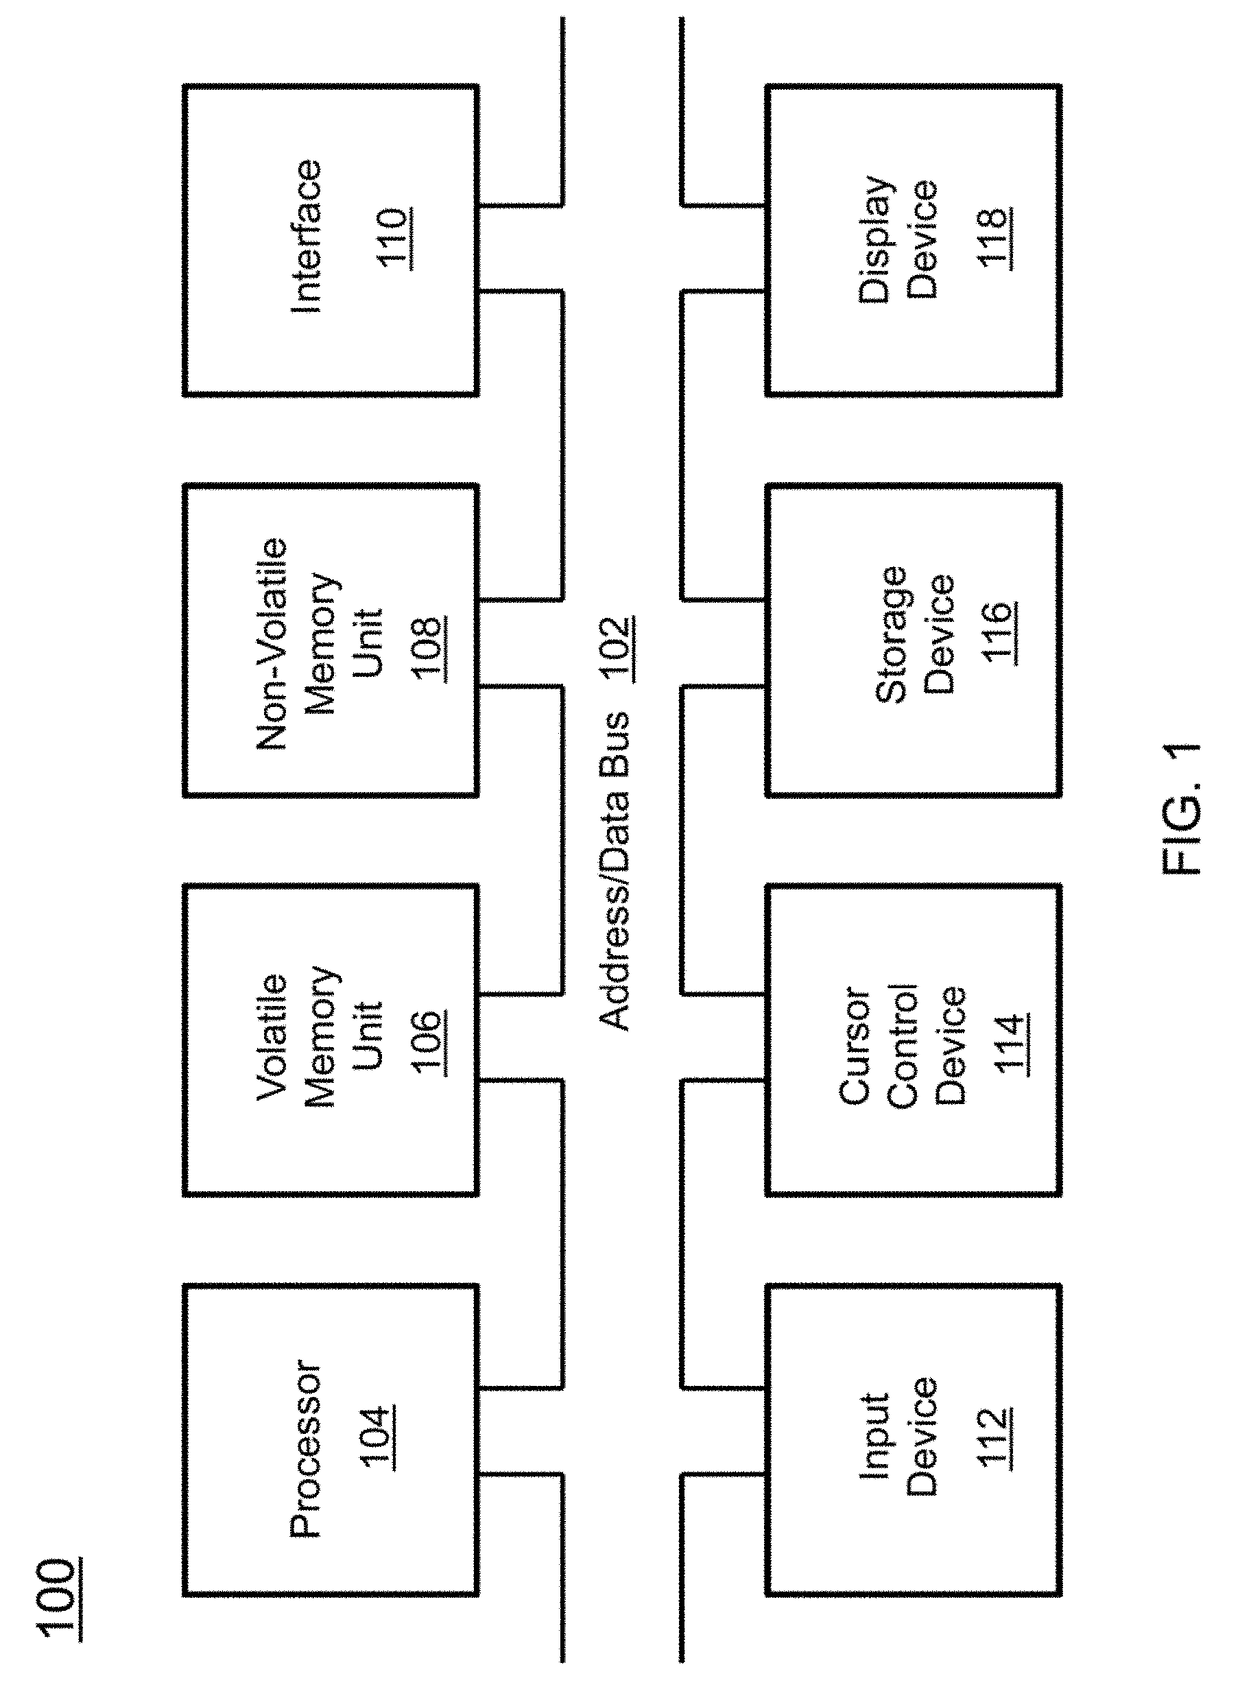 Method for object detection in digital image and video using spiking neural networks